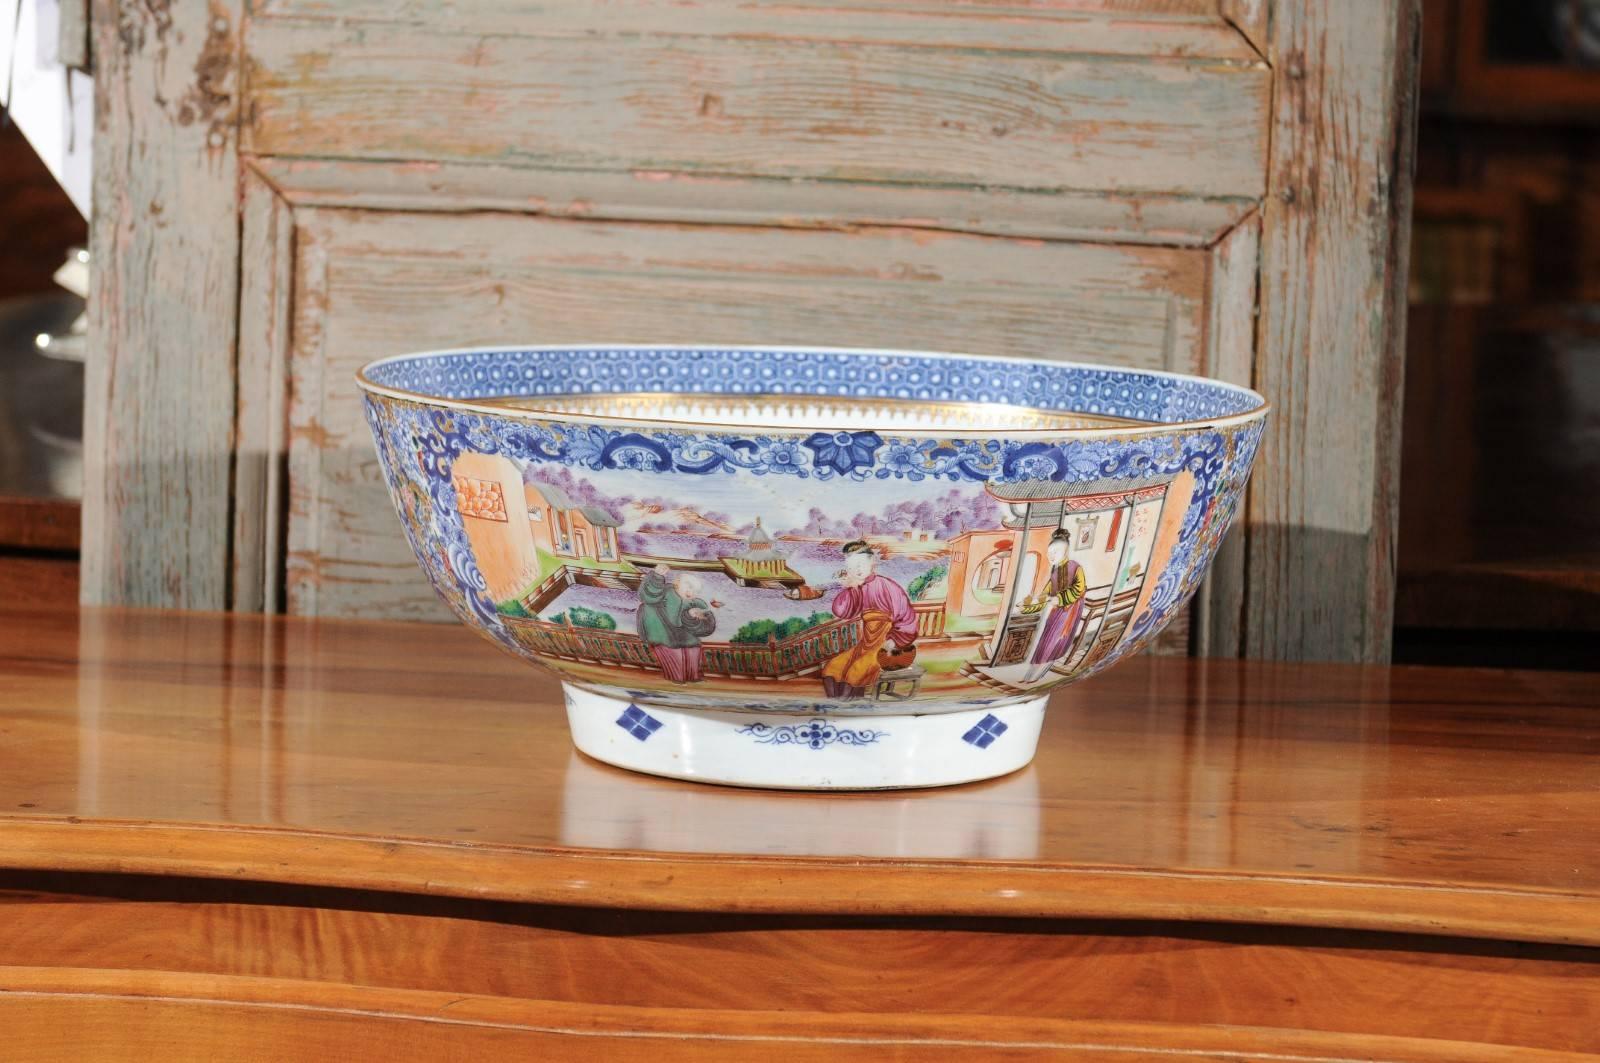 Large Chinese Export punch bowl in Mandarin Palette & Gilt Accents, ca. 1780.